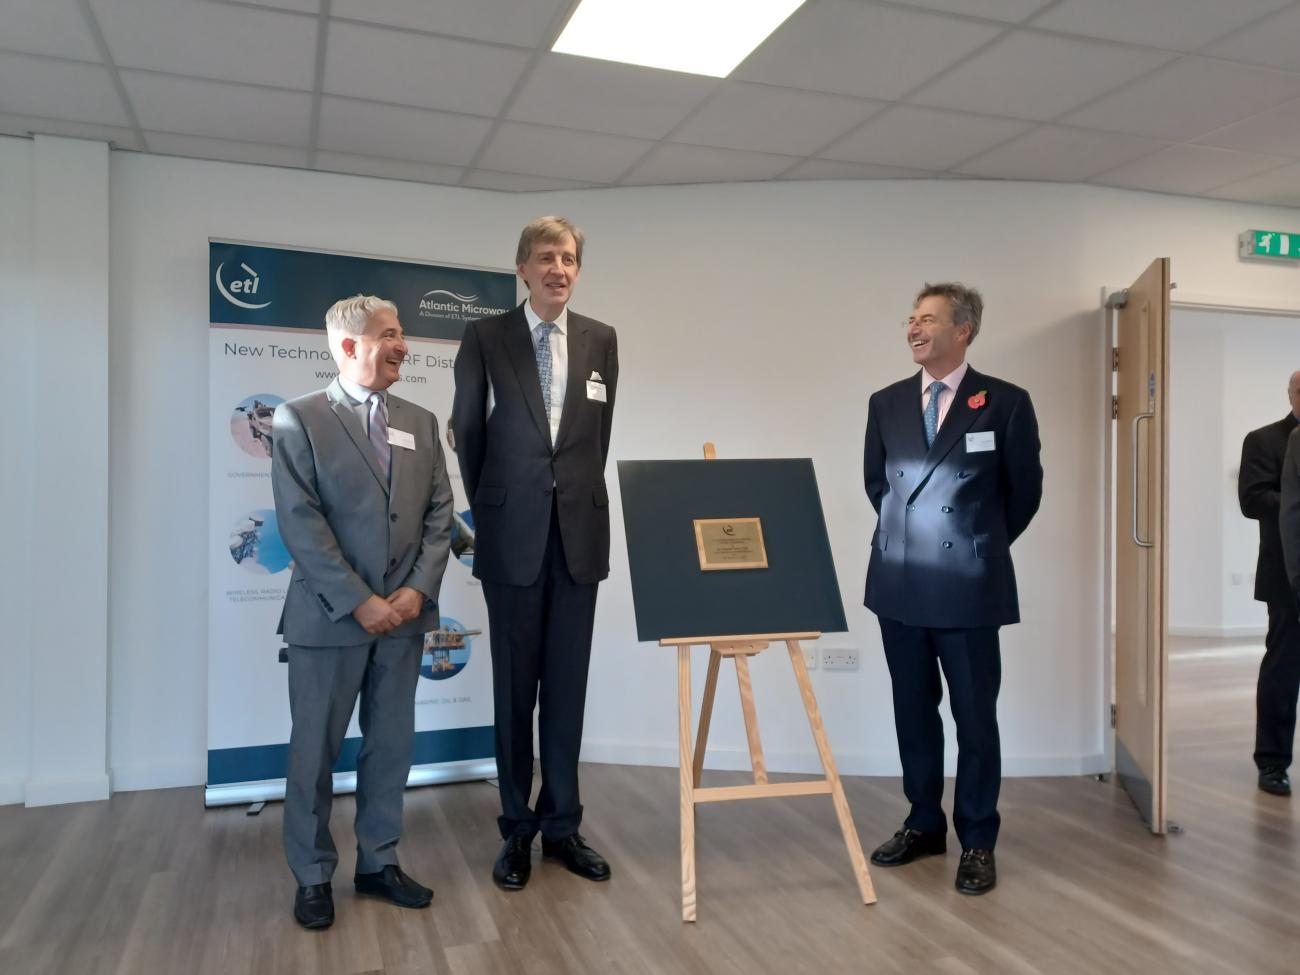 Mr Edward Harley OBE, His Majesty’s Lord-Lieutenant of Herefordshire unveils plaque to commemorate new C4 production facilities